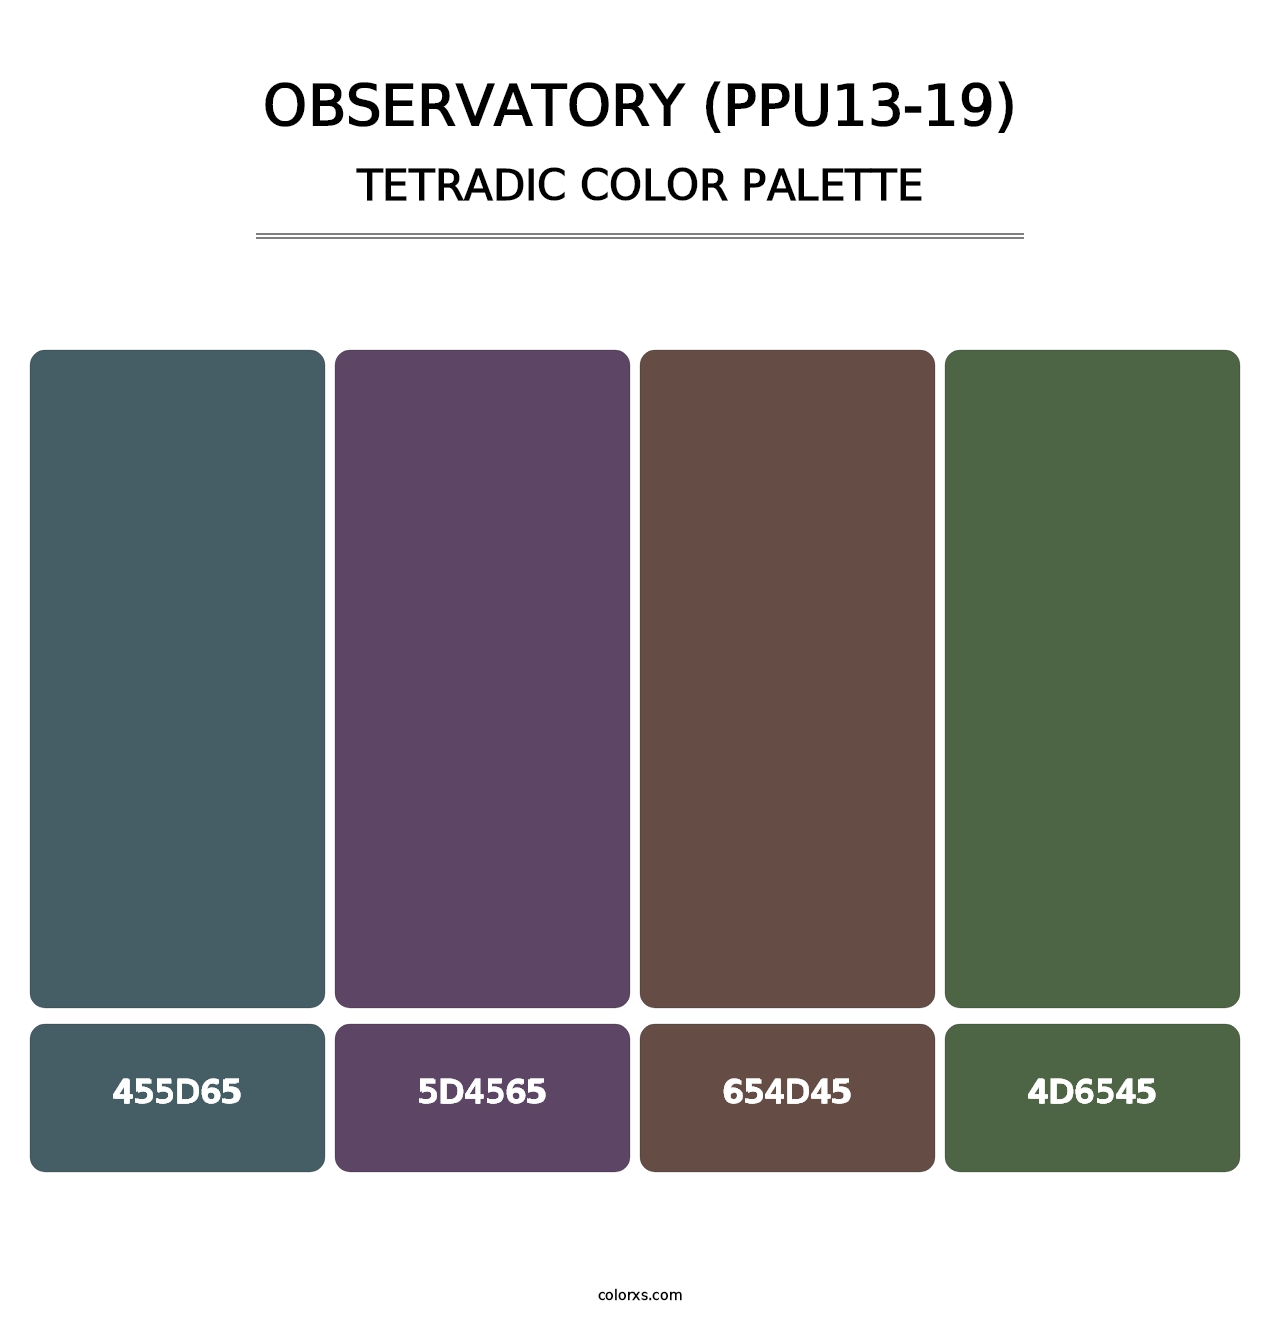 Observatory (PPU13-19) - Tetradic Color Palette